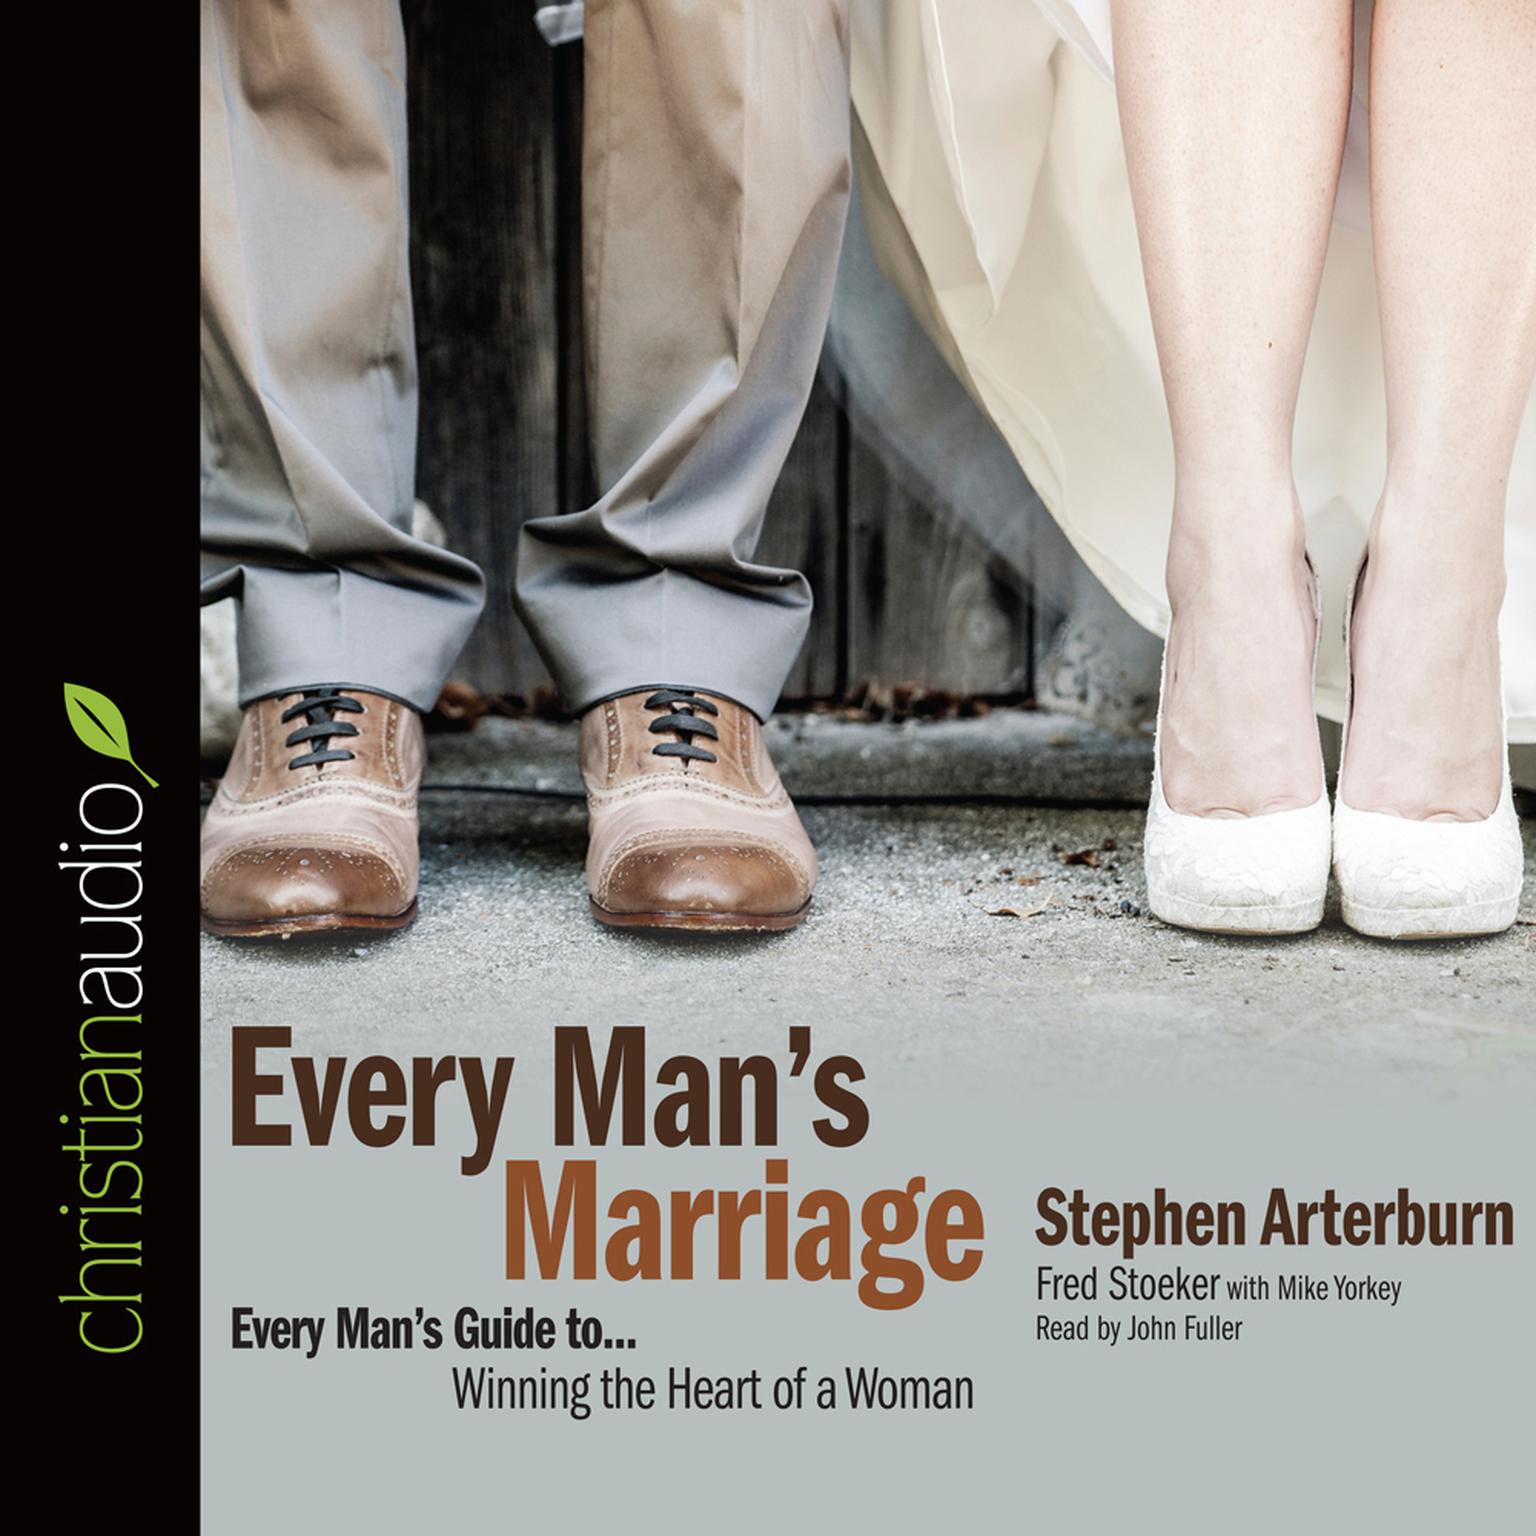 Every Mans Marriage (Abridged): An Every Mans Guide to Winning the Heart of a Woman Audiobook, by Stephen Arterburn